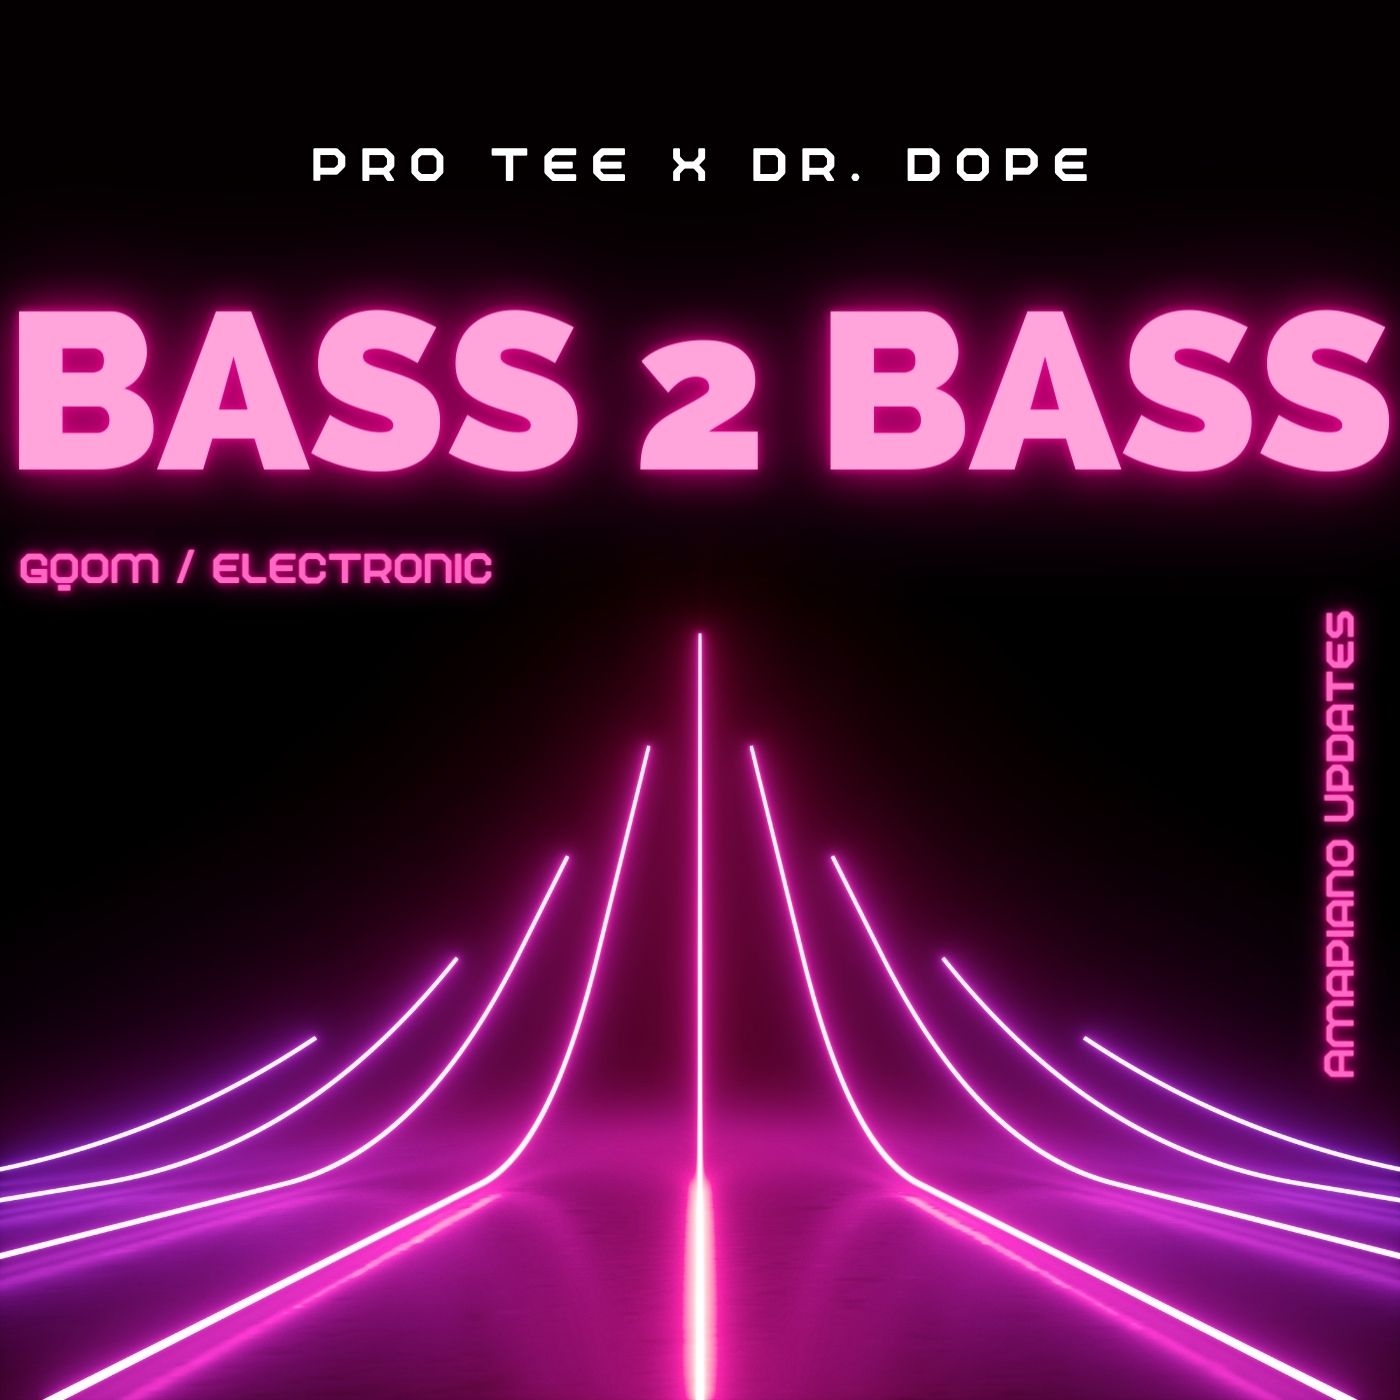 Pro Tee x Dr Dope Bass 2 Bass Album Cover By Amapiano Updates